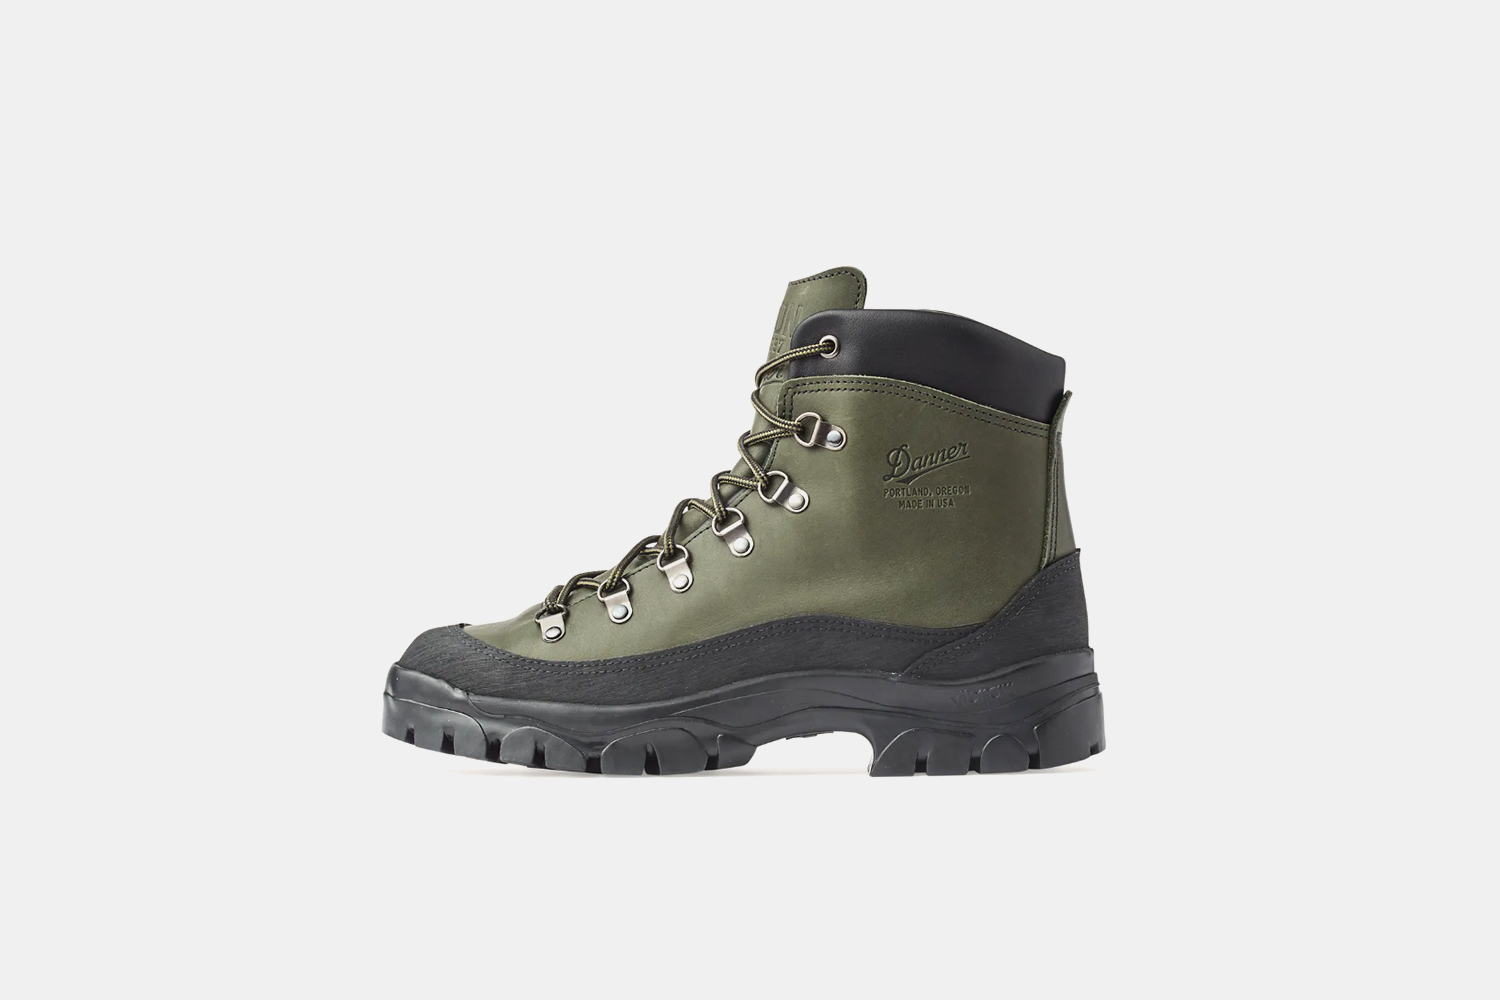 These New Filson x Danner Boots Mean Business